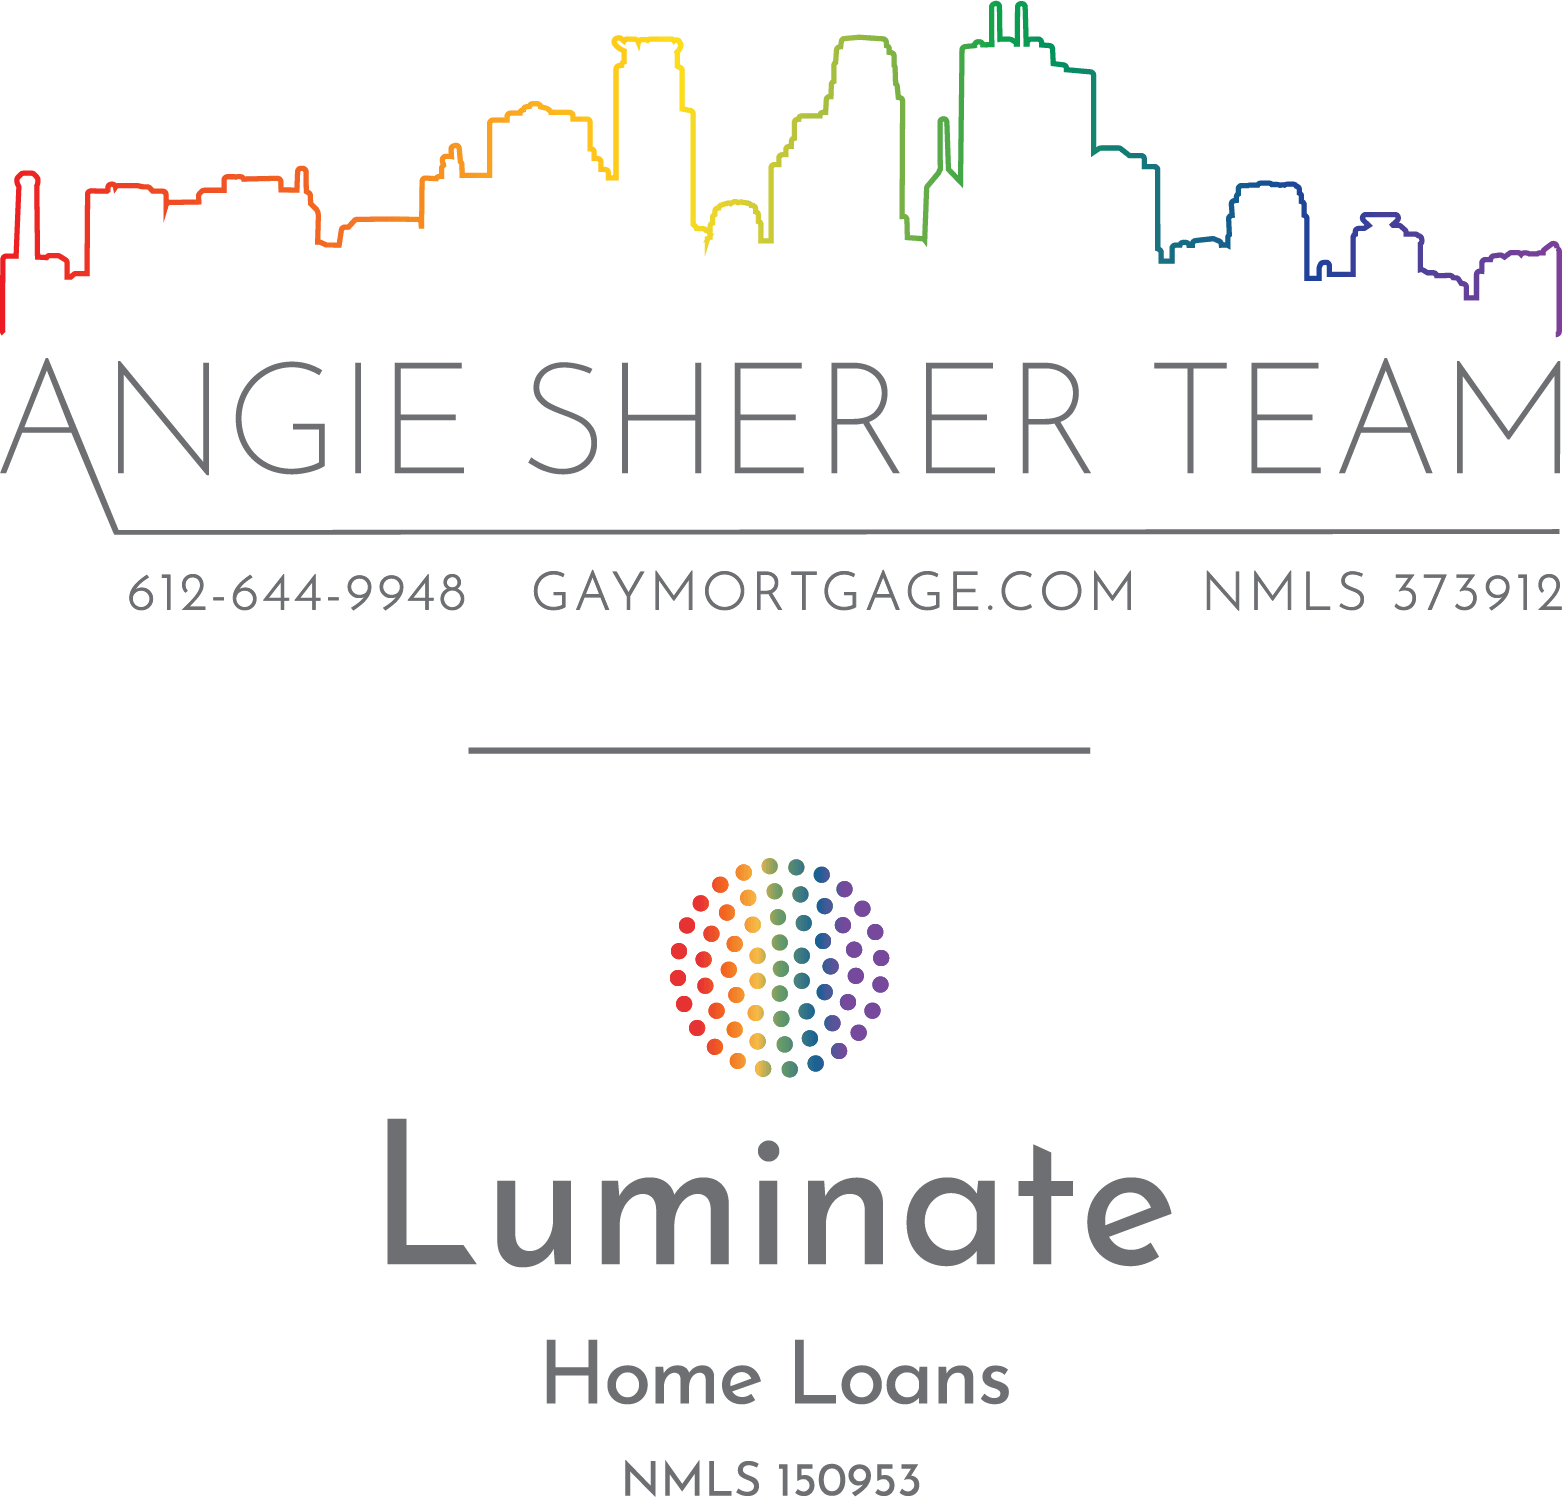 The logo for angie sherer team luminate home loans